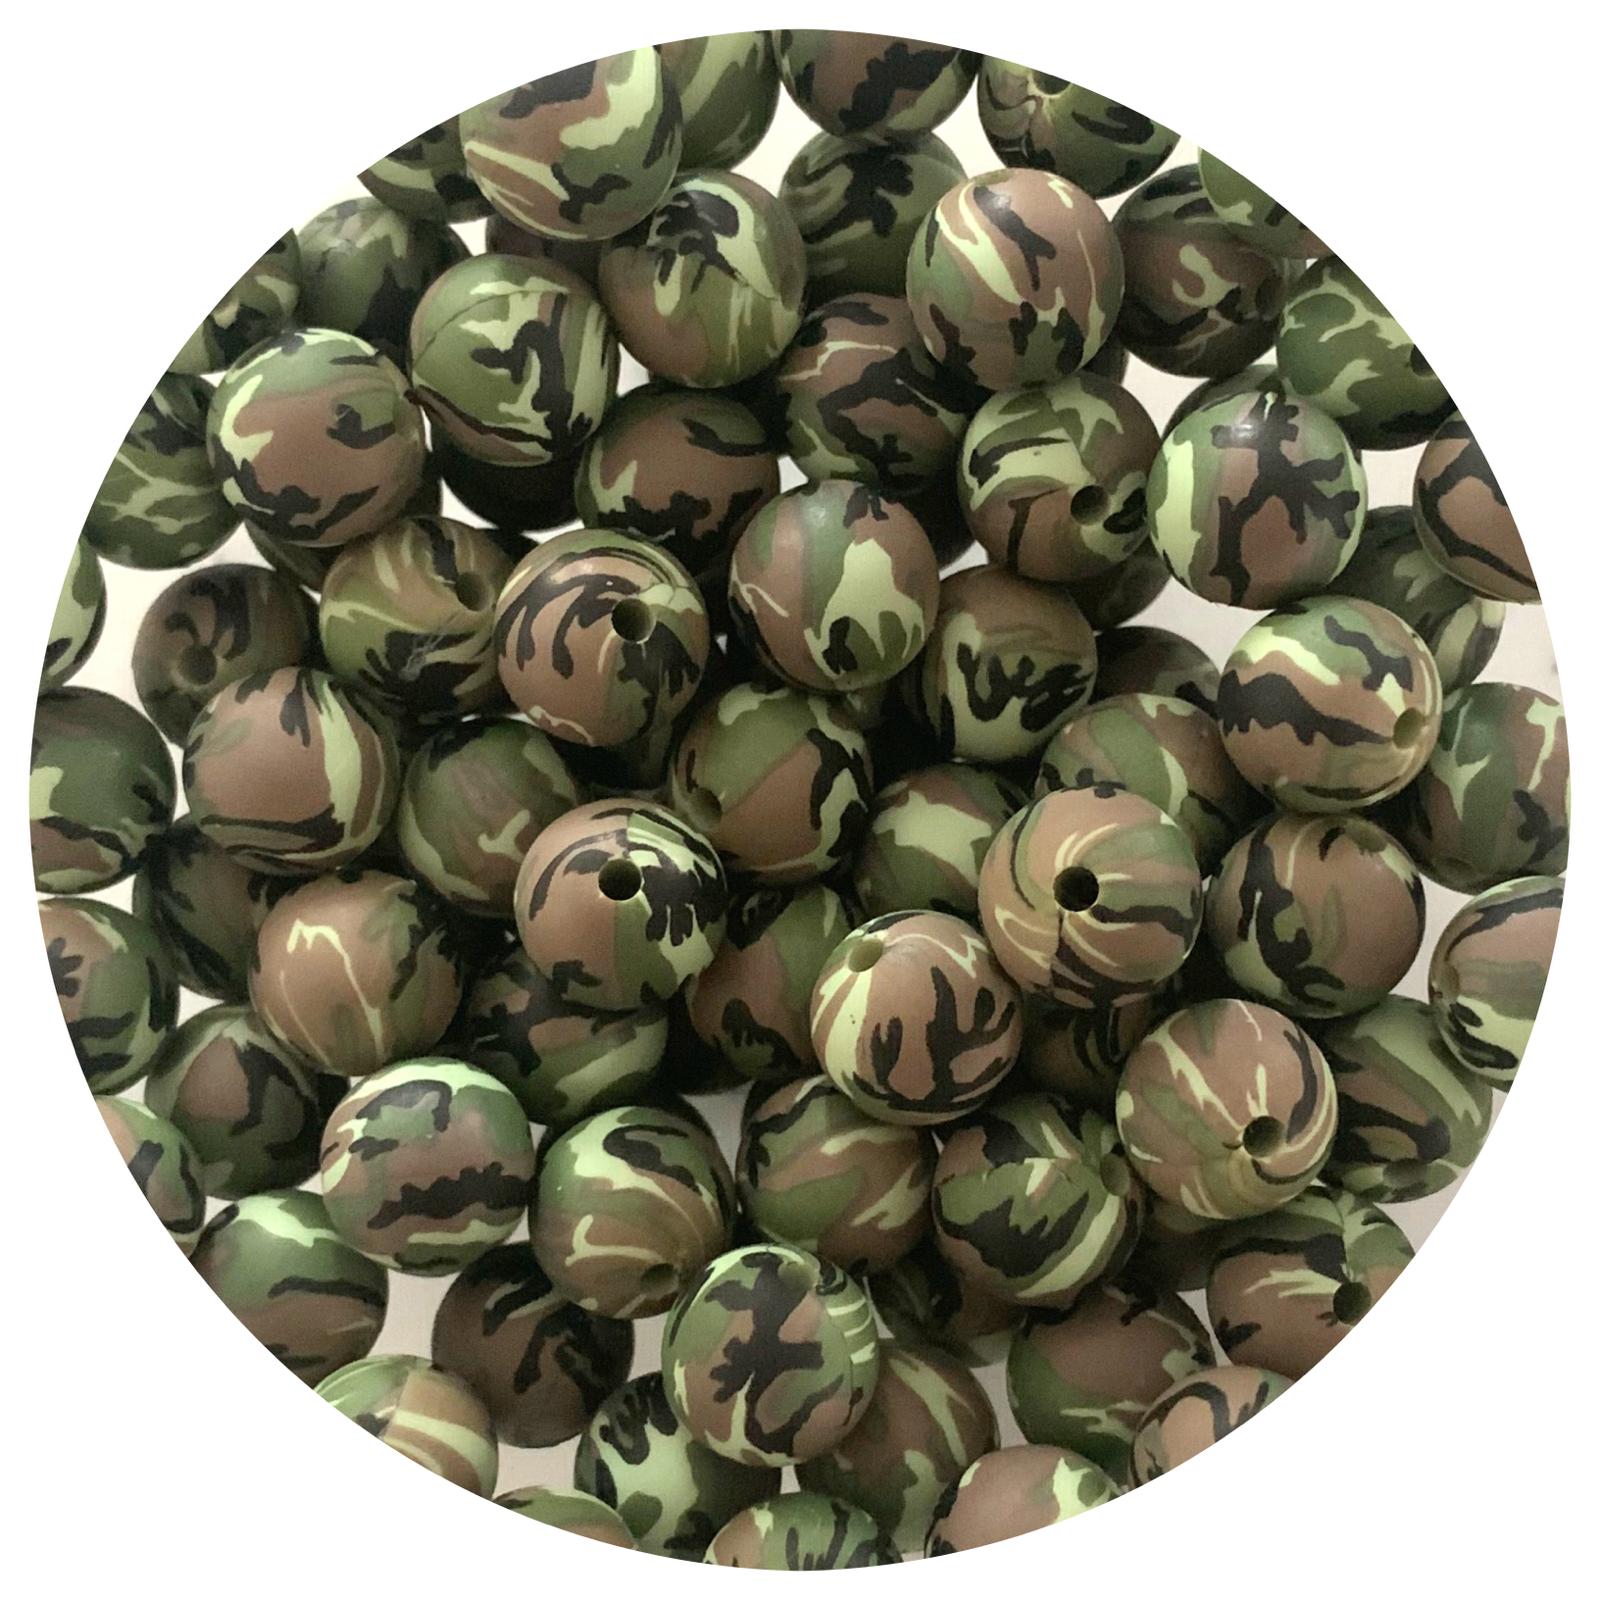 Green Camo - 12mm Round Silicone Beads - 10 beads